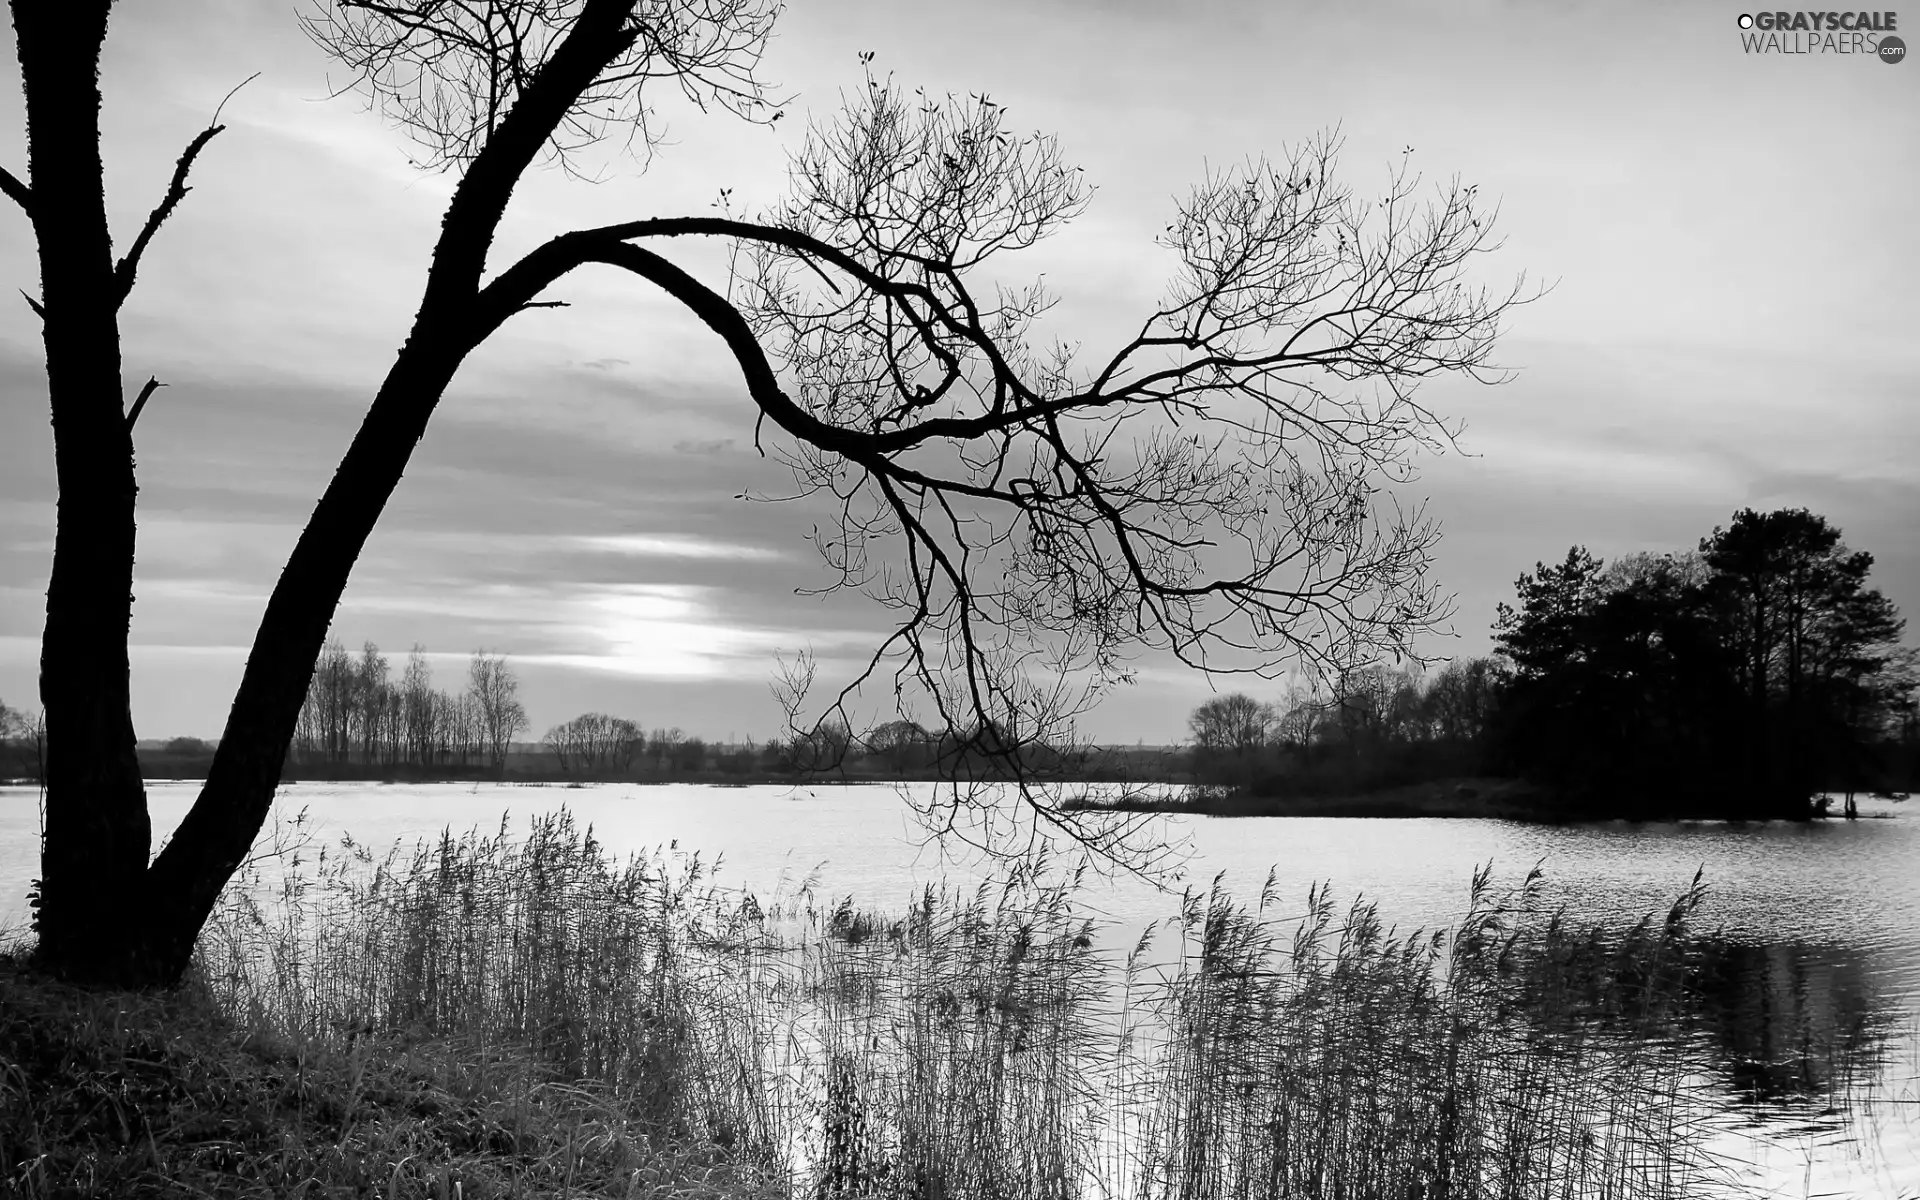 viewes, Islet, east, trees, lake, grass, sun